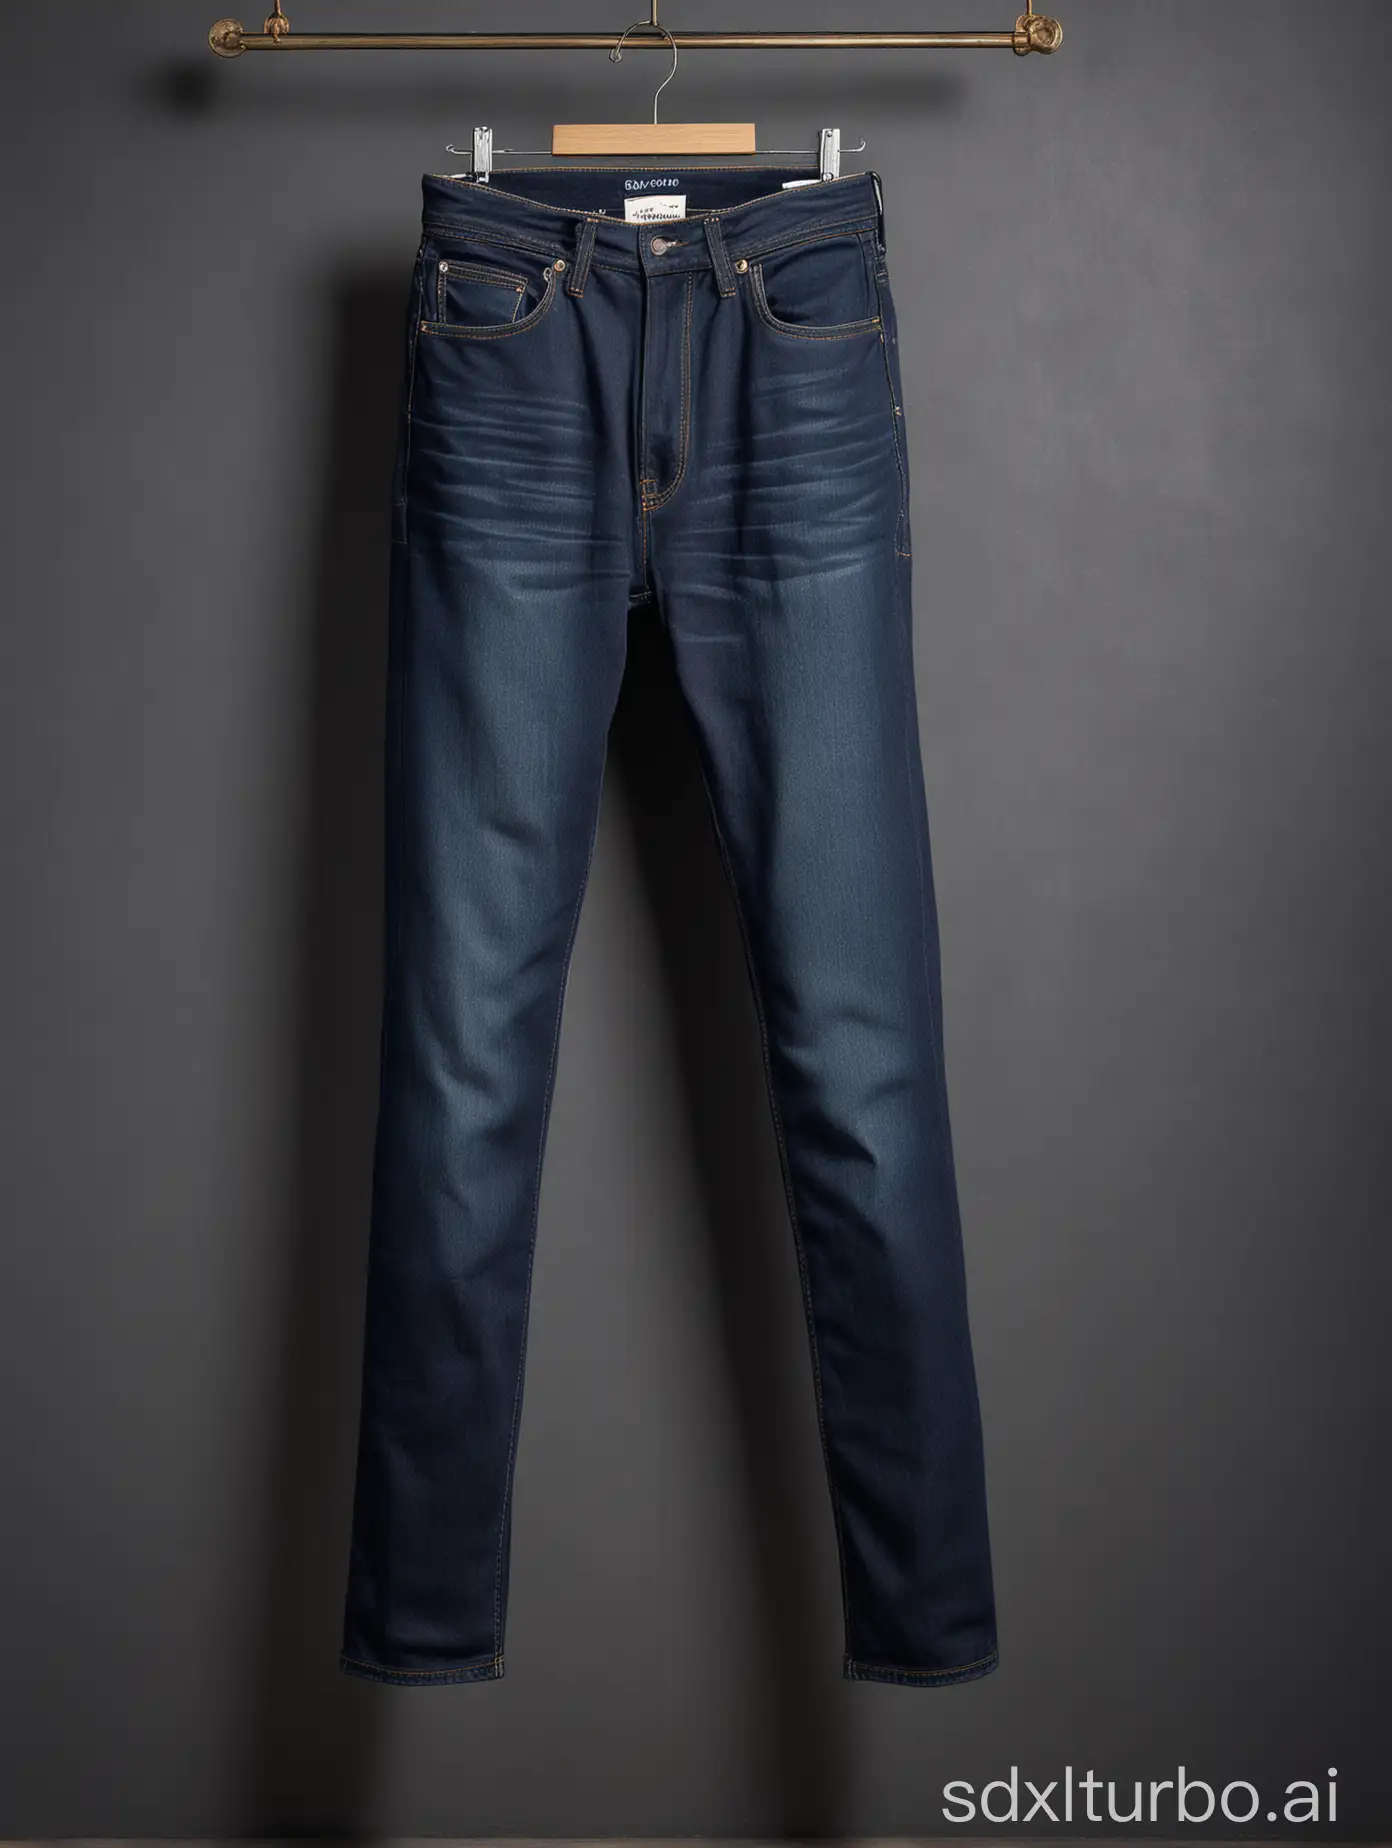 A pair of dark blue, slim-fit jeans hanging on a clothes rack. The jeans are made of a soft, stretchy denim and have a classic five-pocket design. They are perfect for a night out on the town or a casual day at the office.